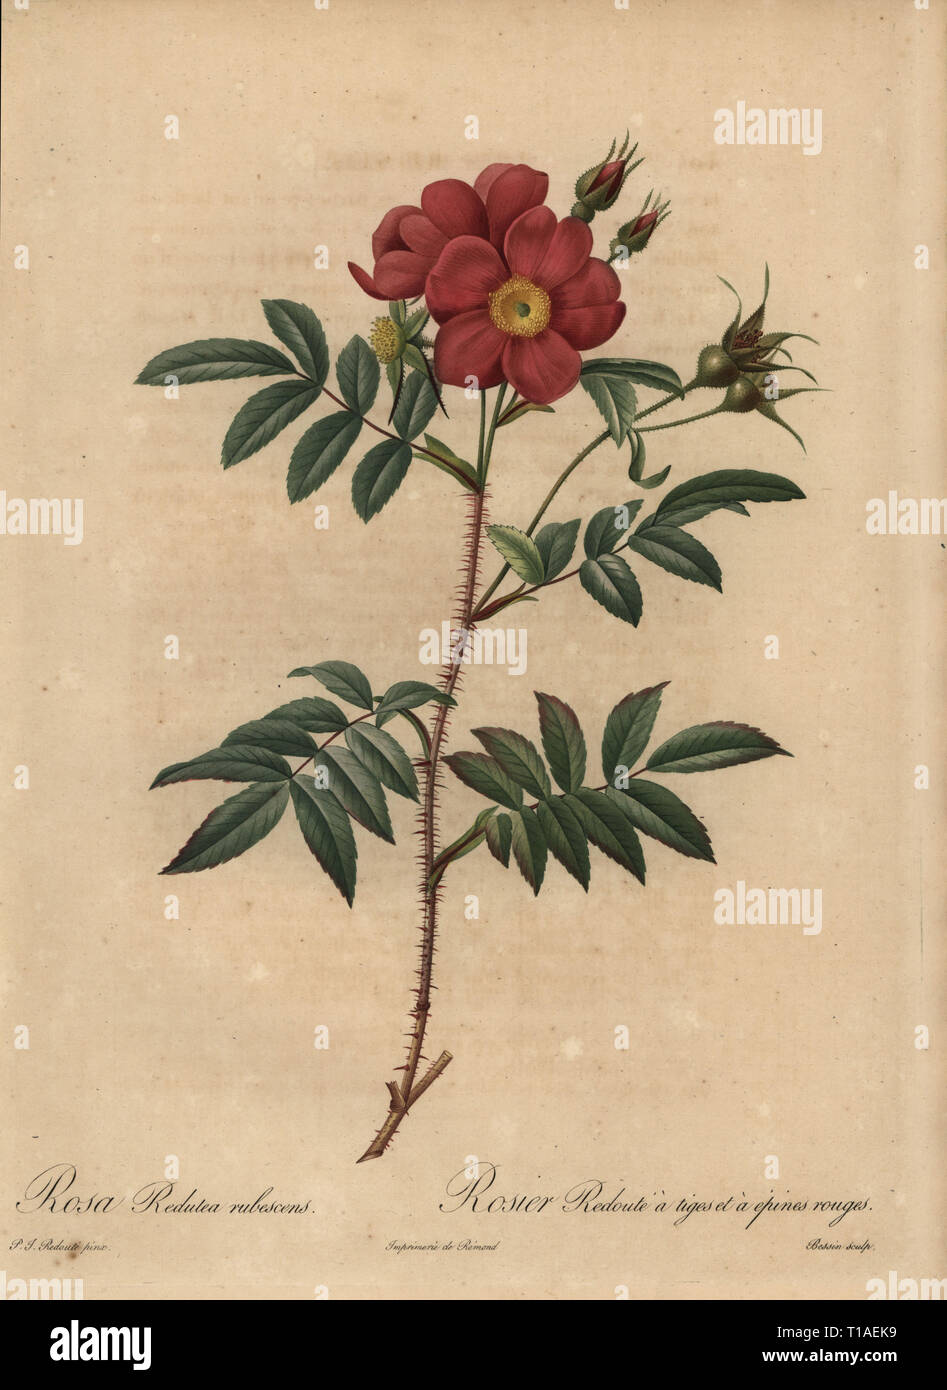 Red rose, Rosa redutea rubescens, Rosier Redoute a tiges et a epines rouges. Stipple copperplate engraving by Rosine-Antoinette Bessin handcoloured a la poupee after a botanical illustration by Pierre-Joseph Redoute from the first folio edition of Les Roses, Firmin Didot, Paris, 1817. Stock Photo